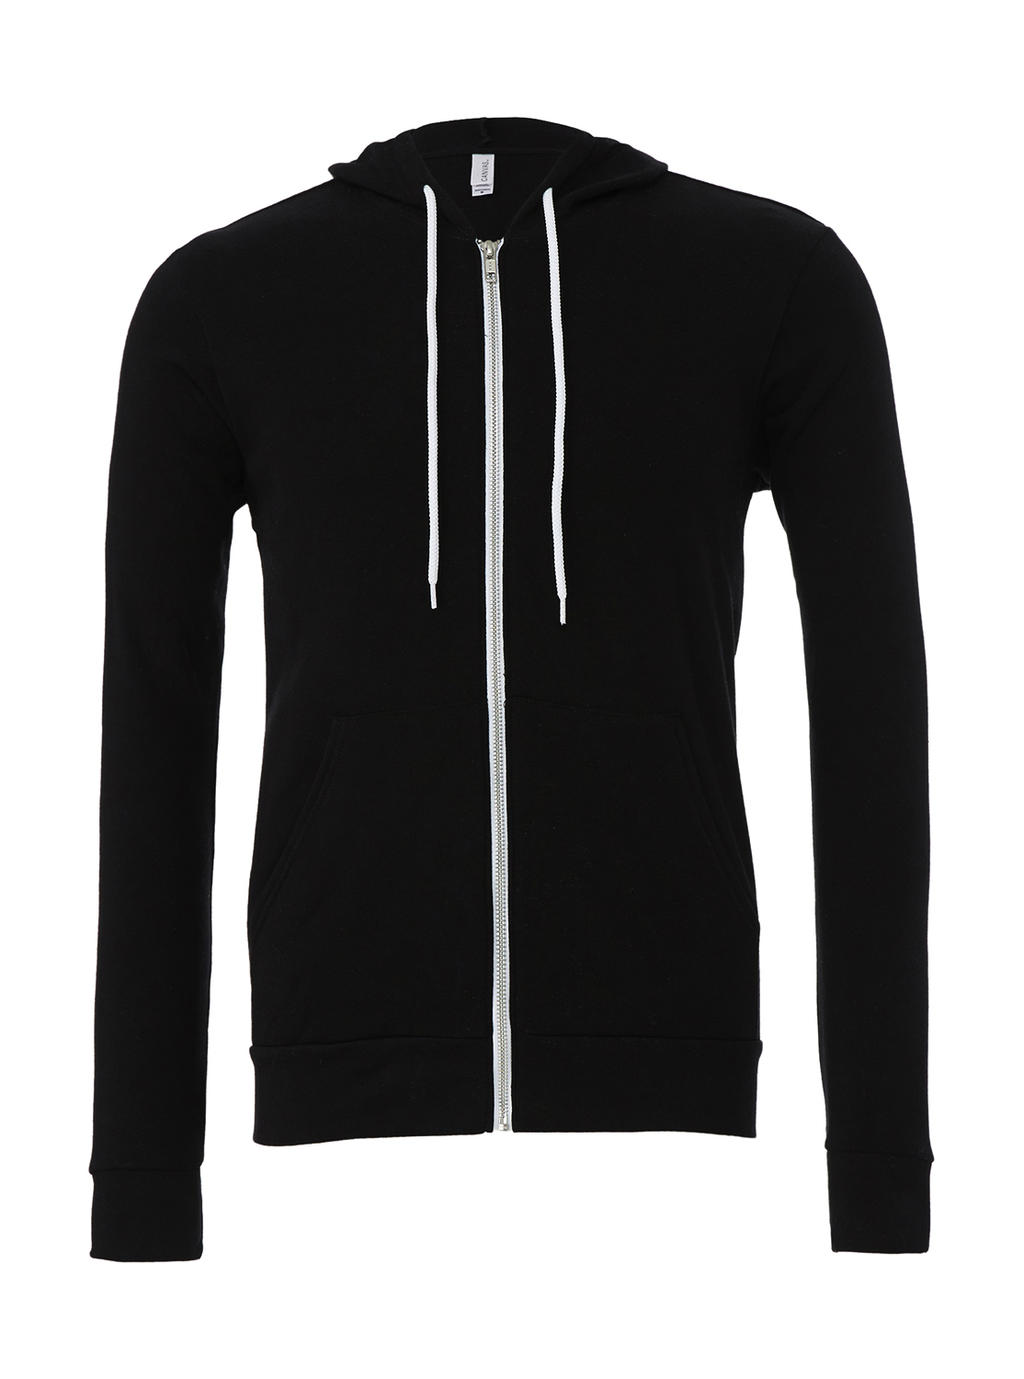  Unisex Poly-Cotton Full Zip Hoodie in Farbe Black